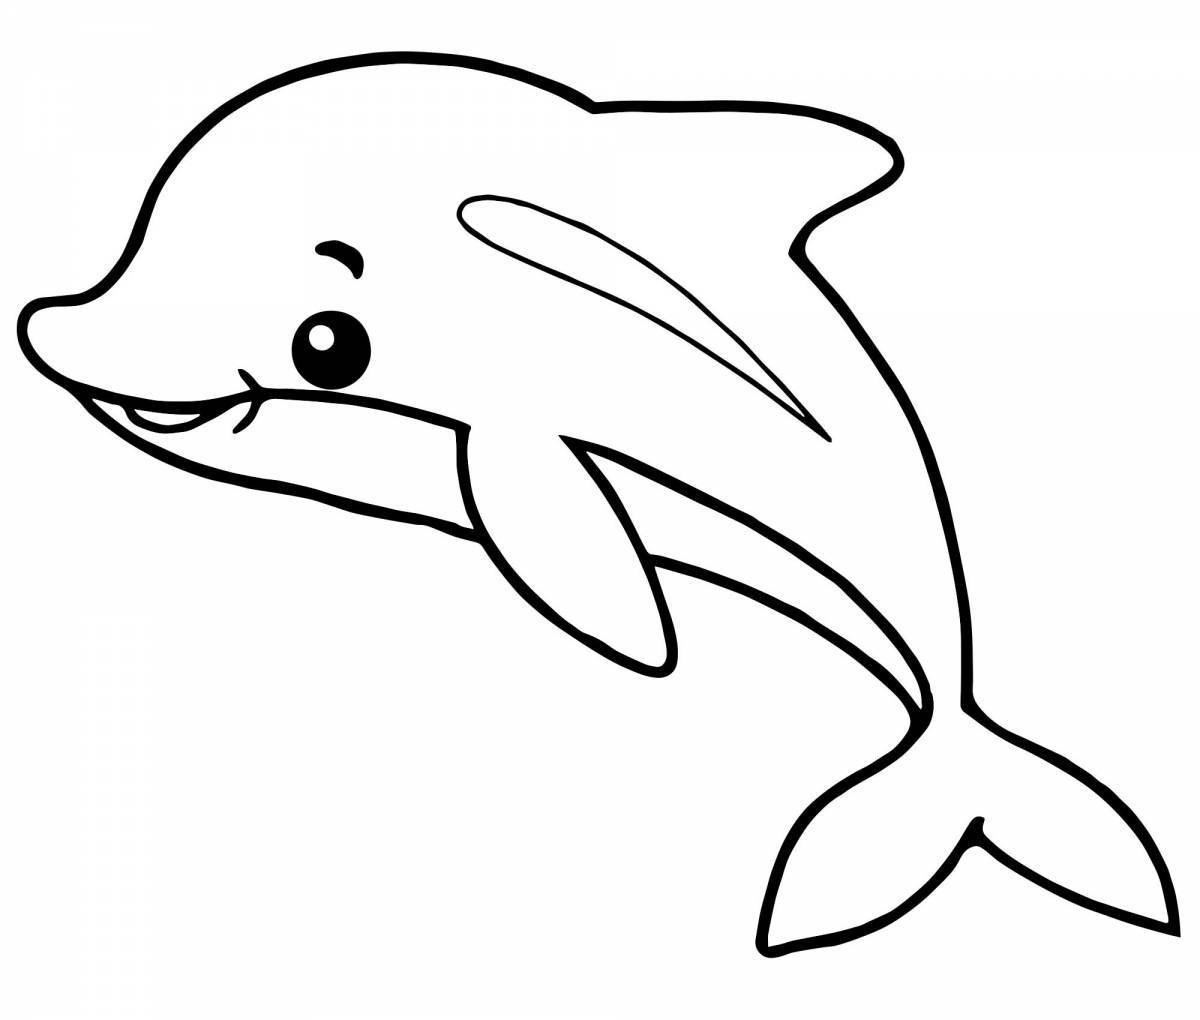 Dolphin for kids #6